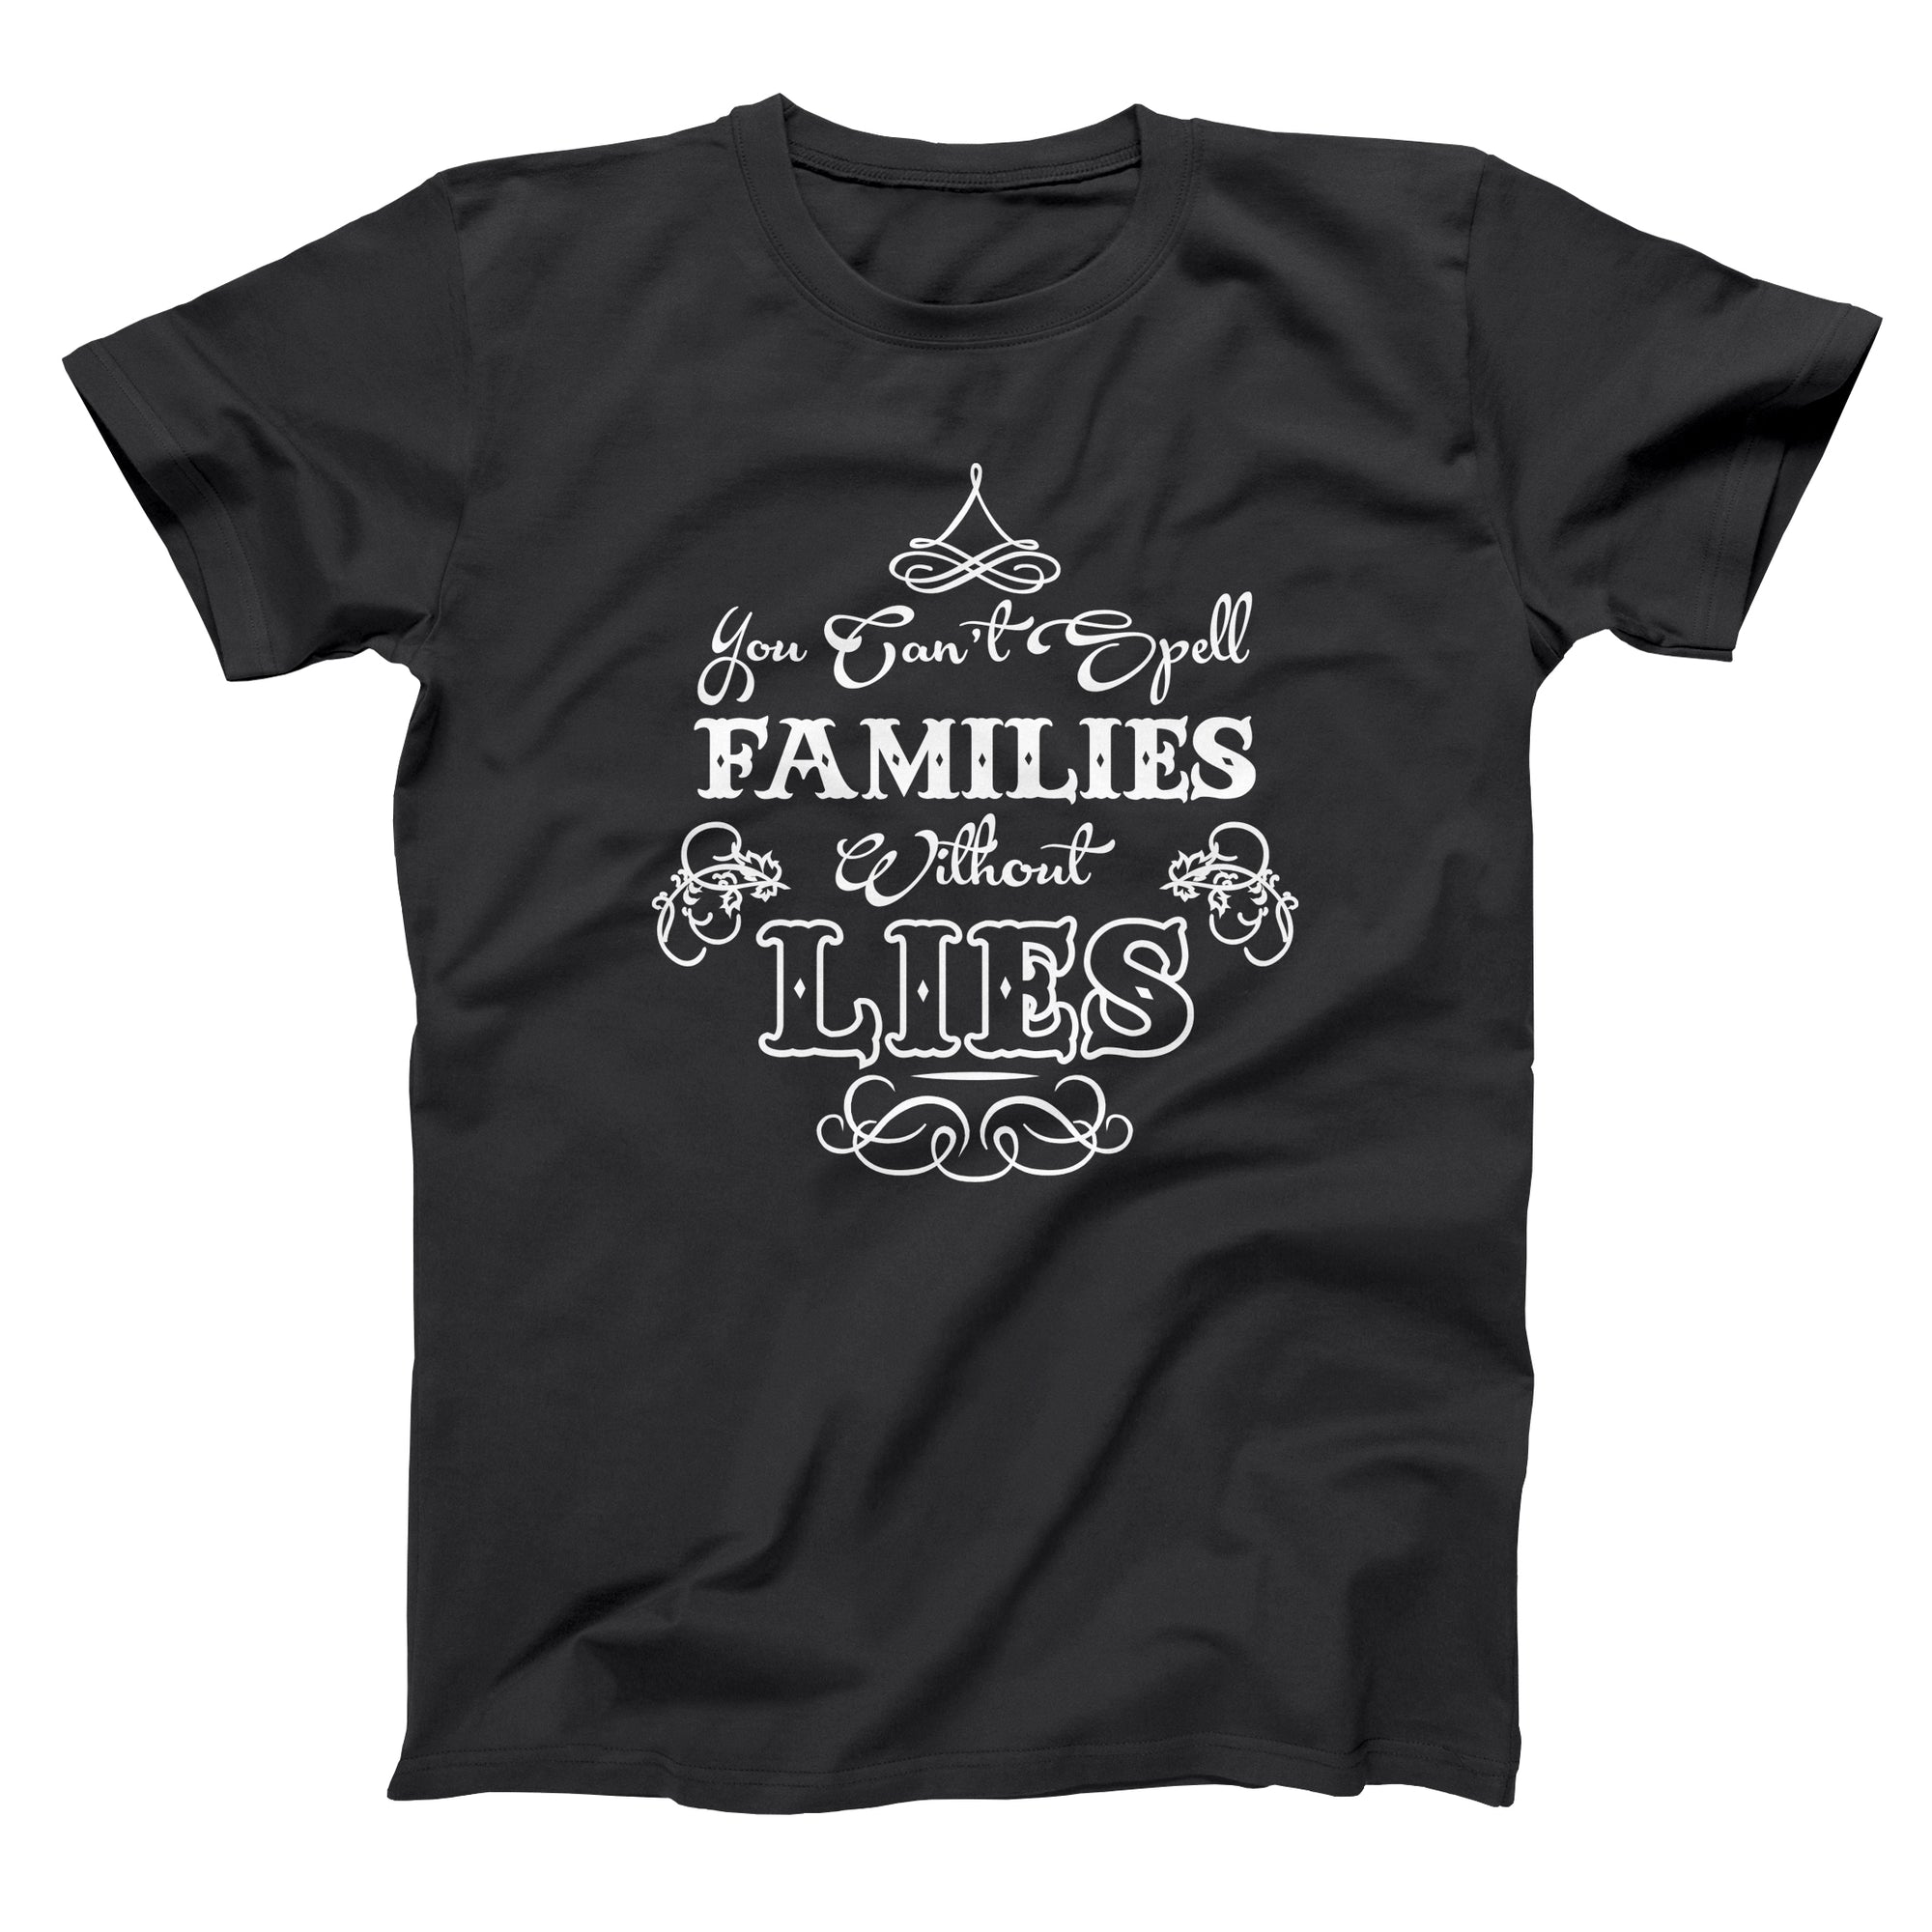 Can't Spell Families Without Lies Tshirt - Donkey Tees